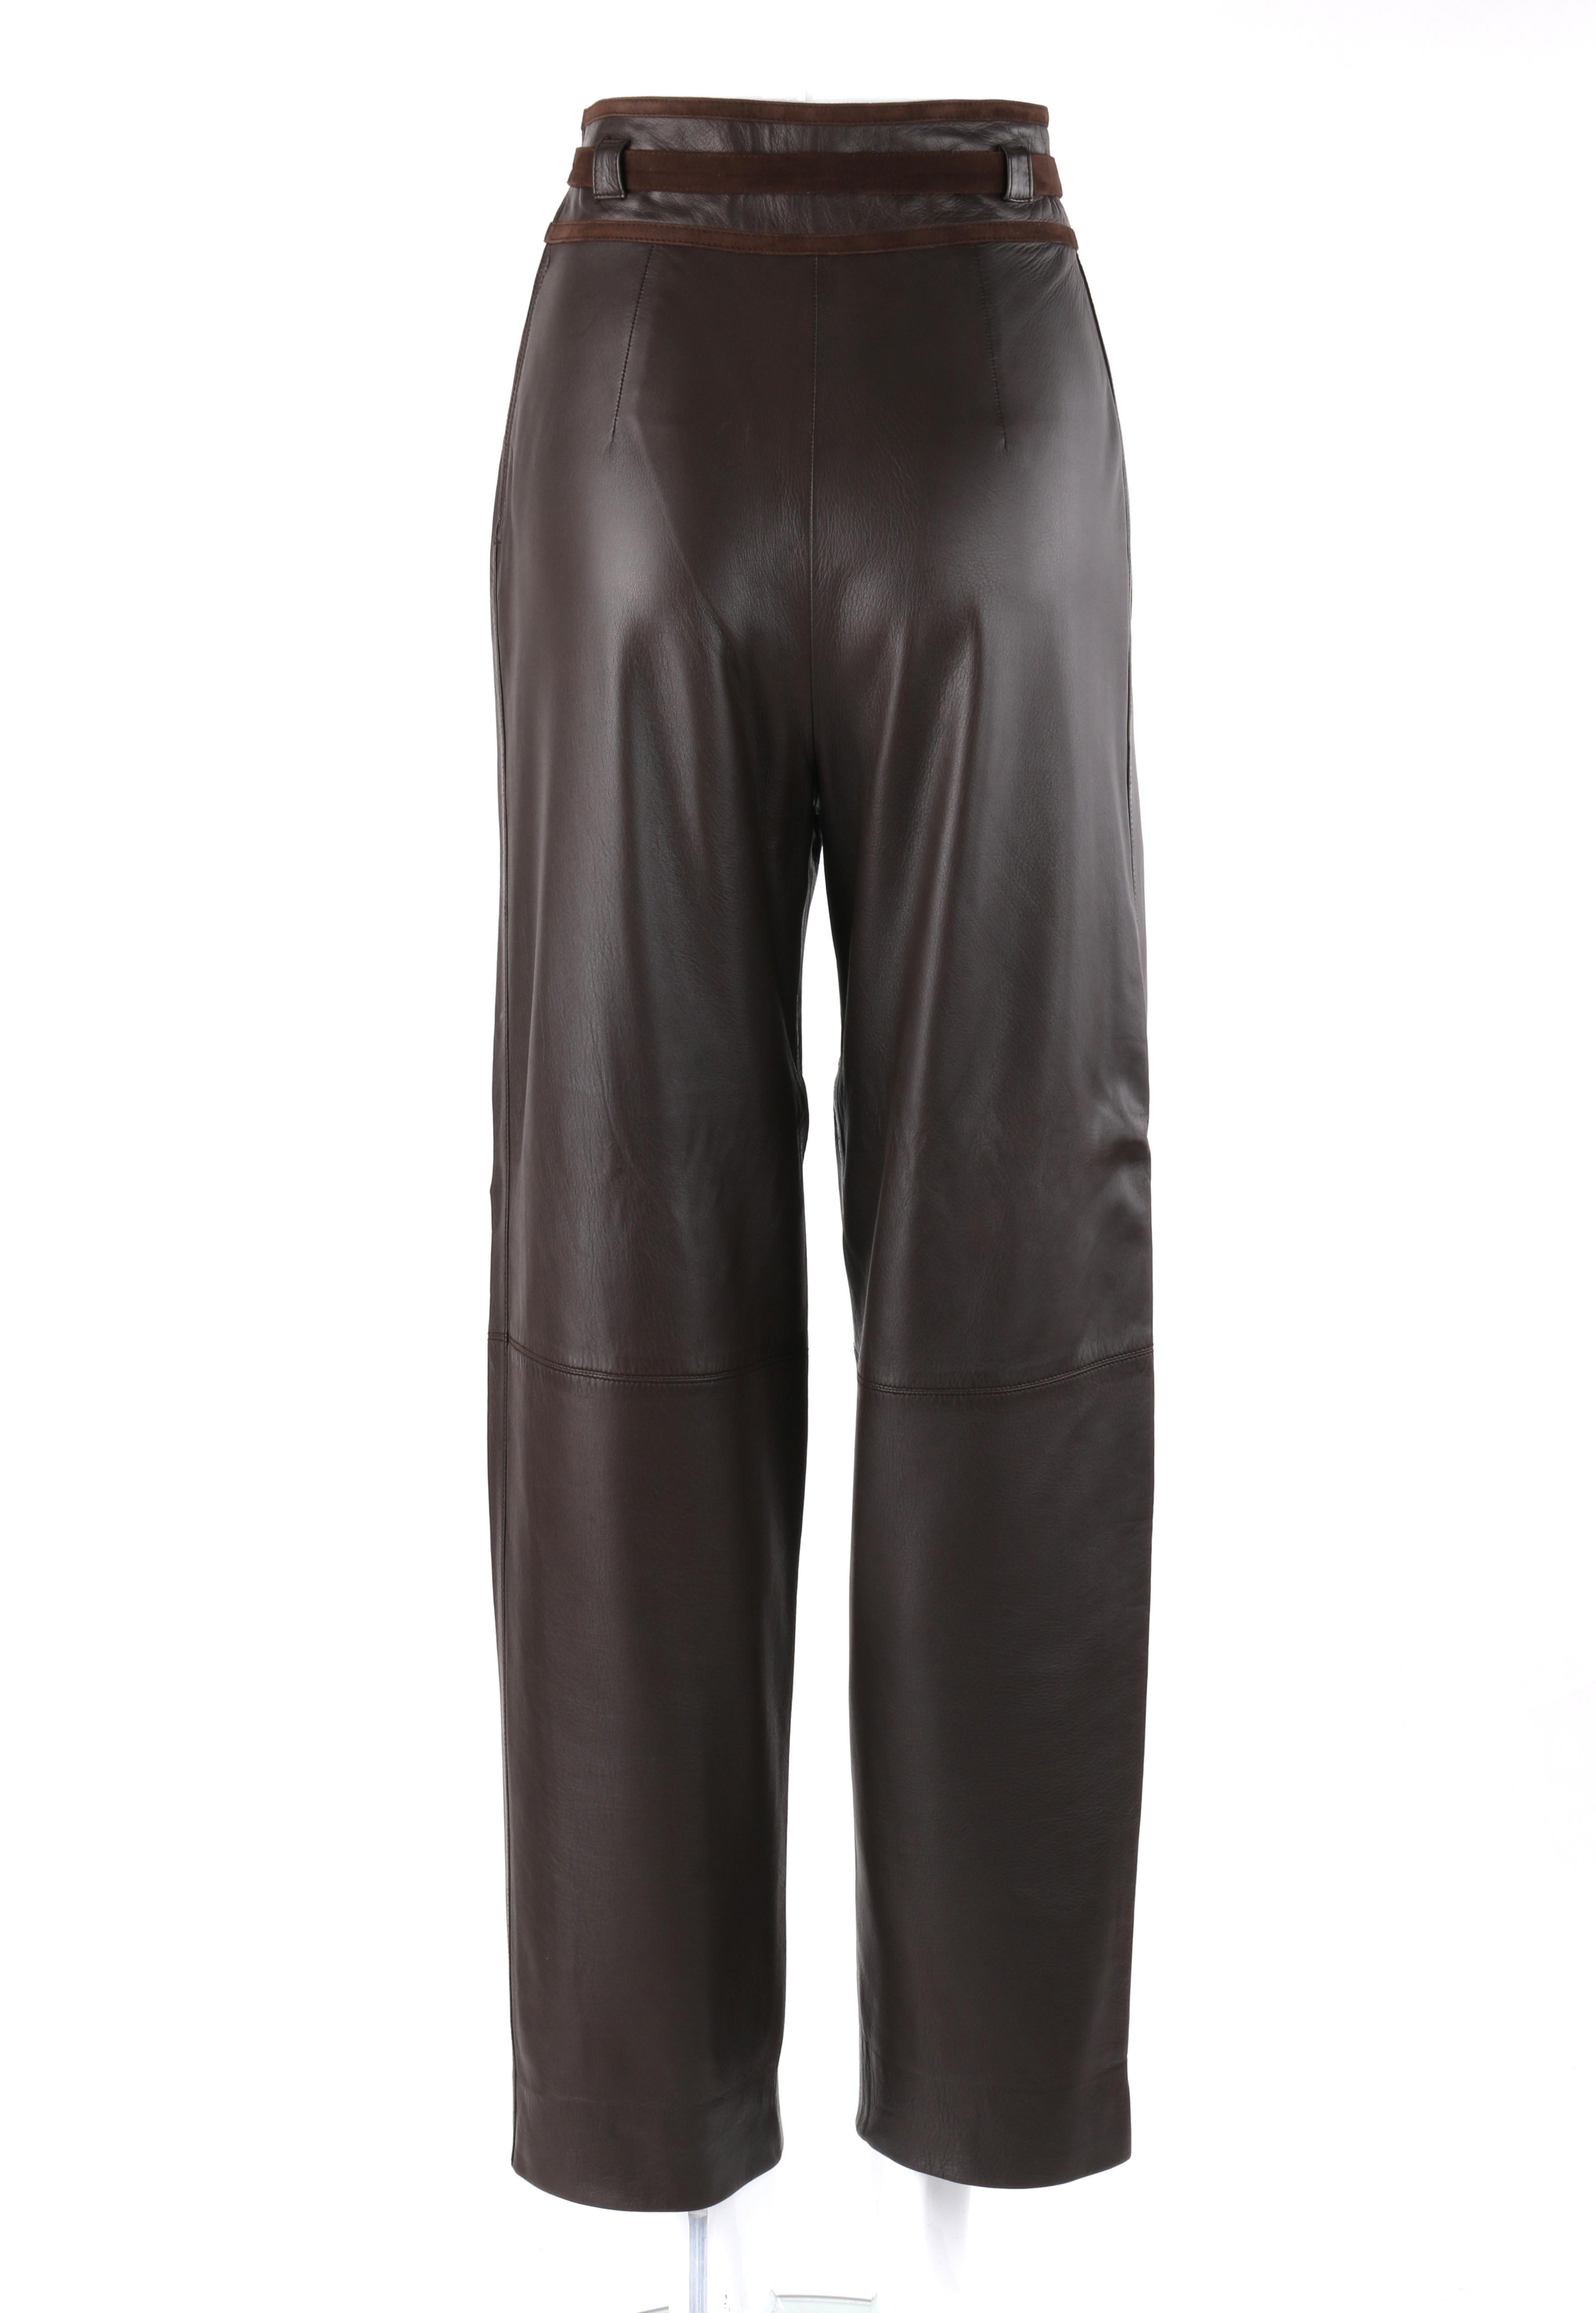 Black GUCCI c.1970’s Dark Brown Leather High Waisted Tapered Trouser Pants